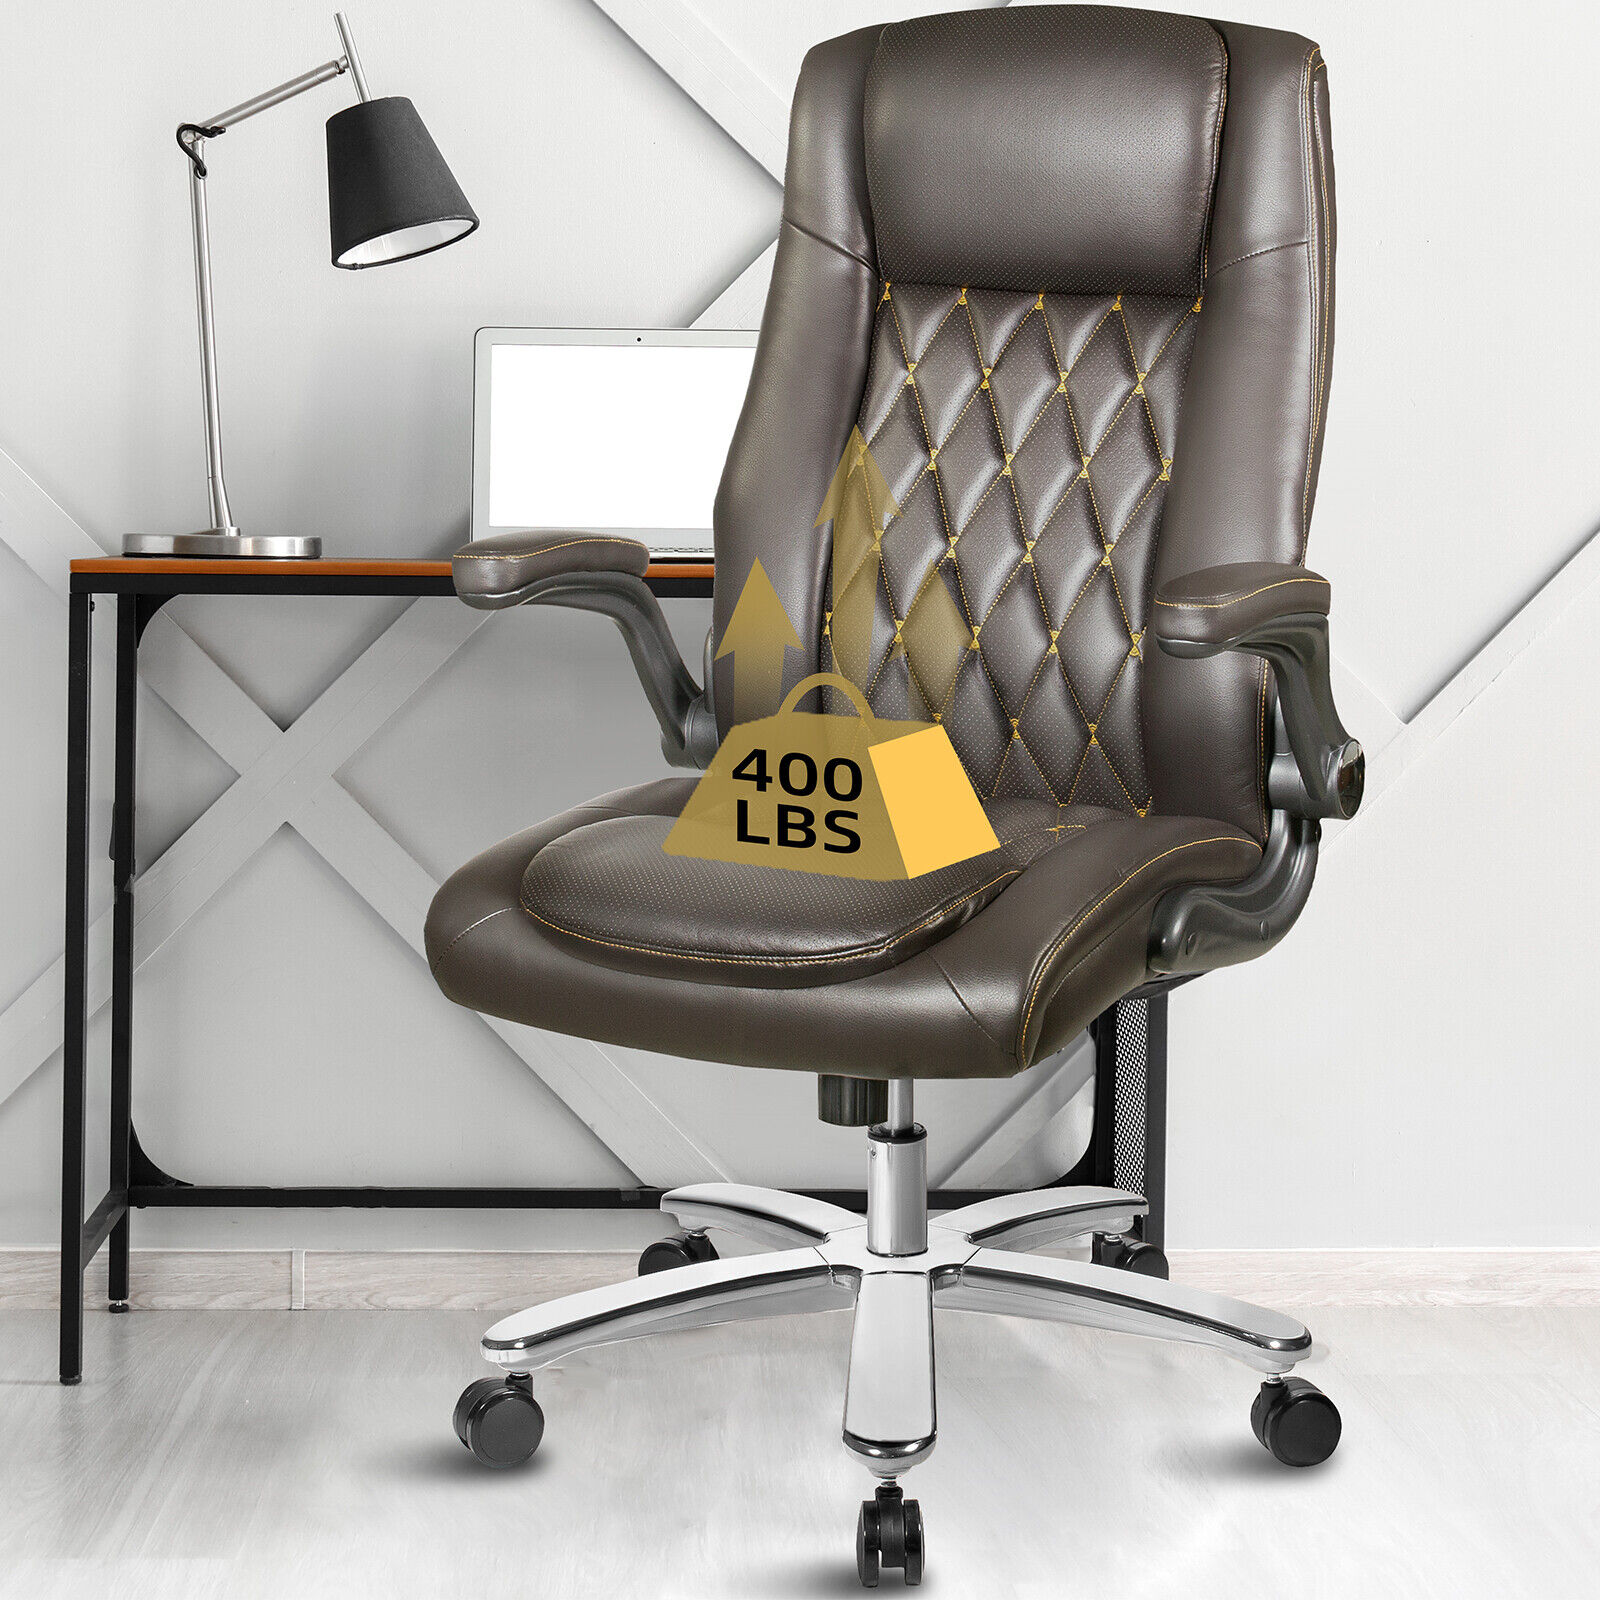 PU Leather Office Chair Ergonomic Swivel Computer Home Work Desk Comfy Chair